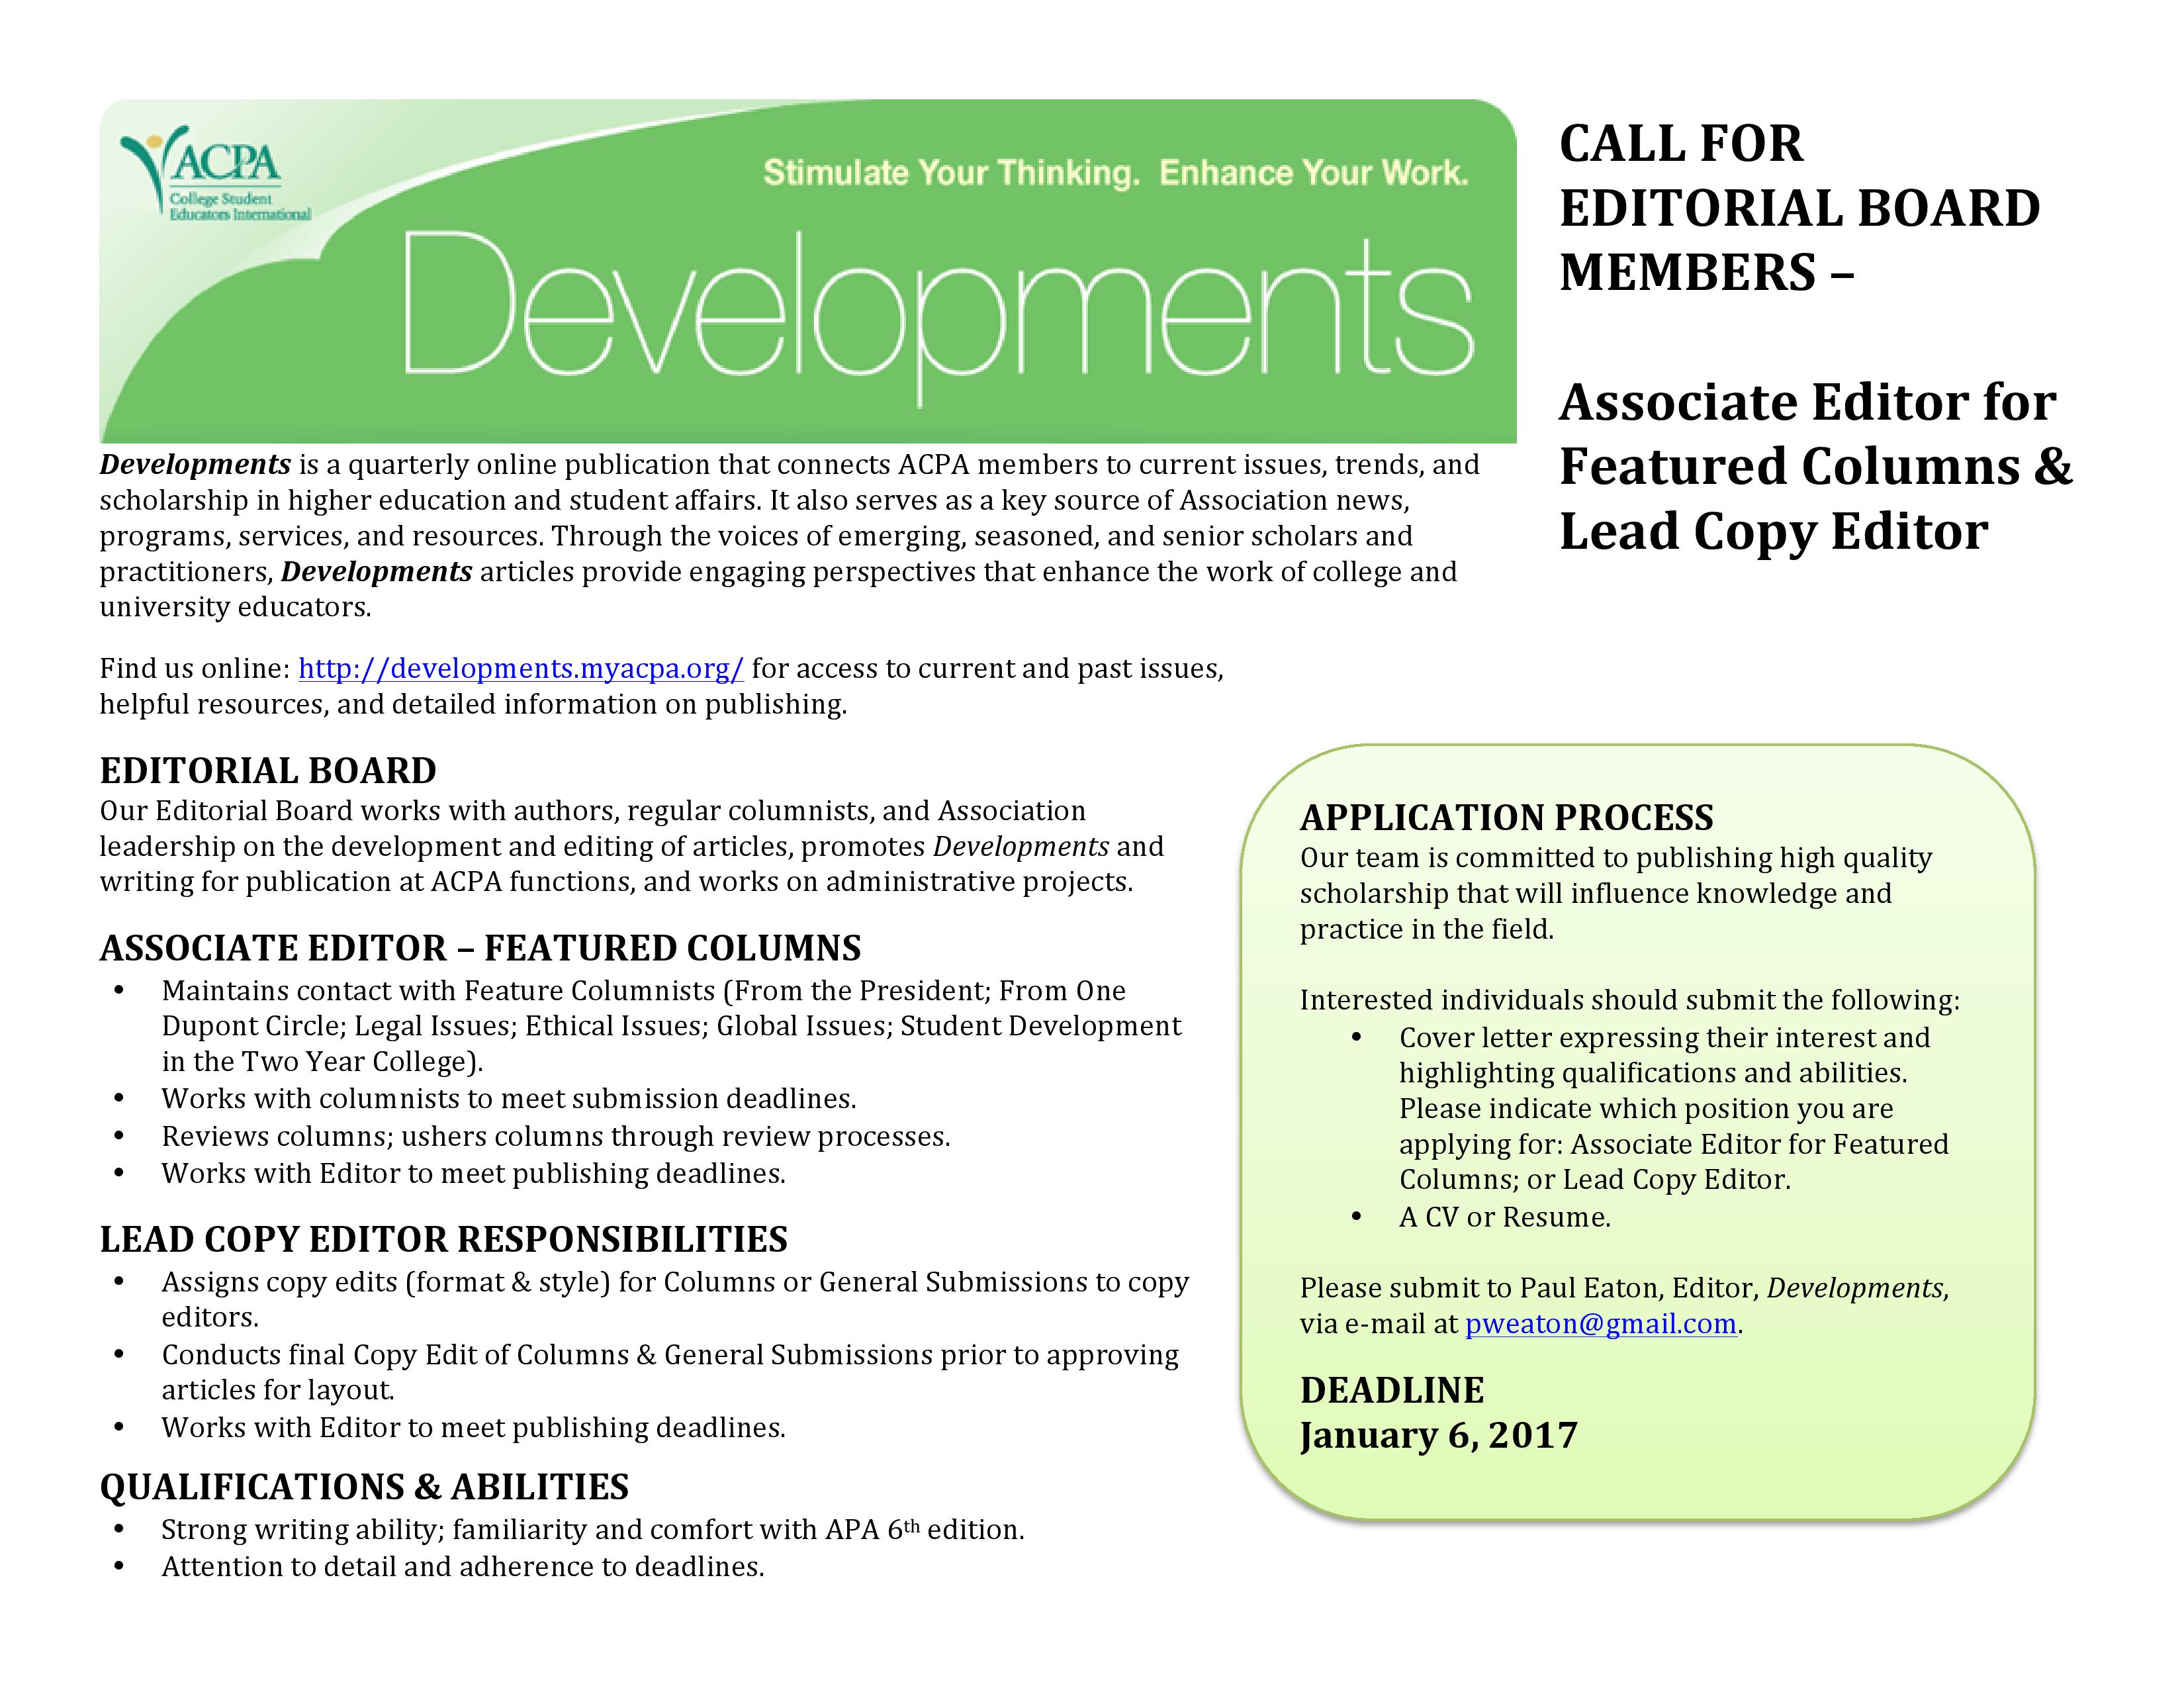 Click this image to download a readable pdf of this Call for Editorial Board Positions